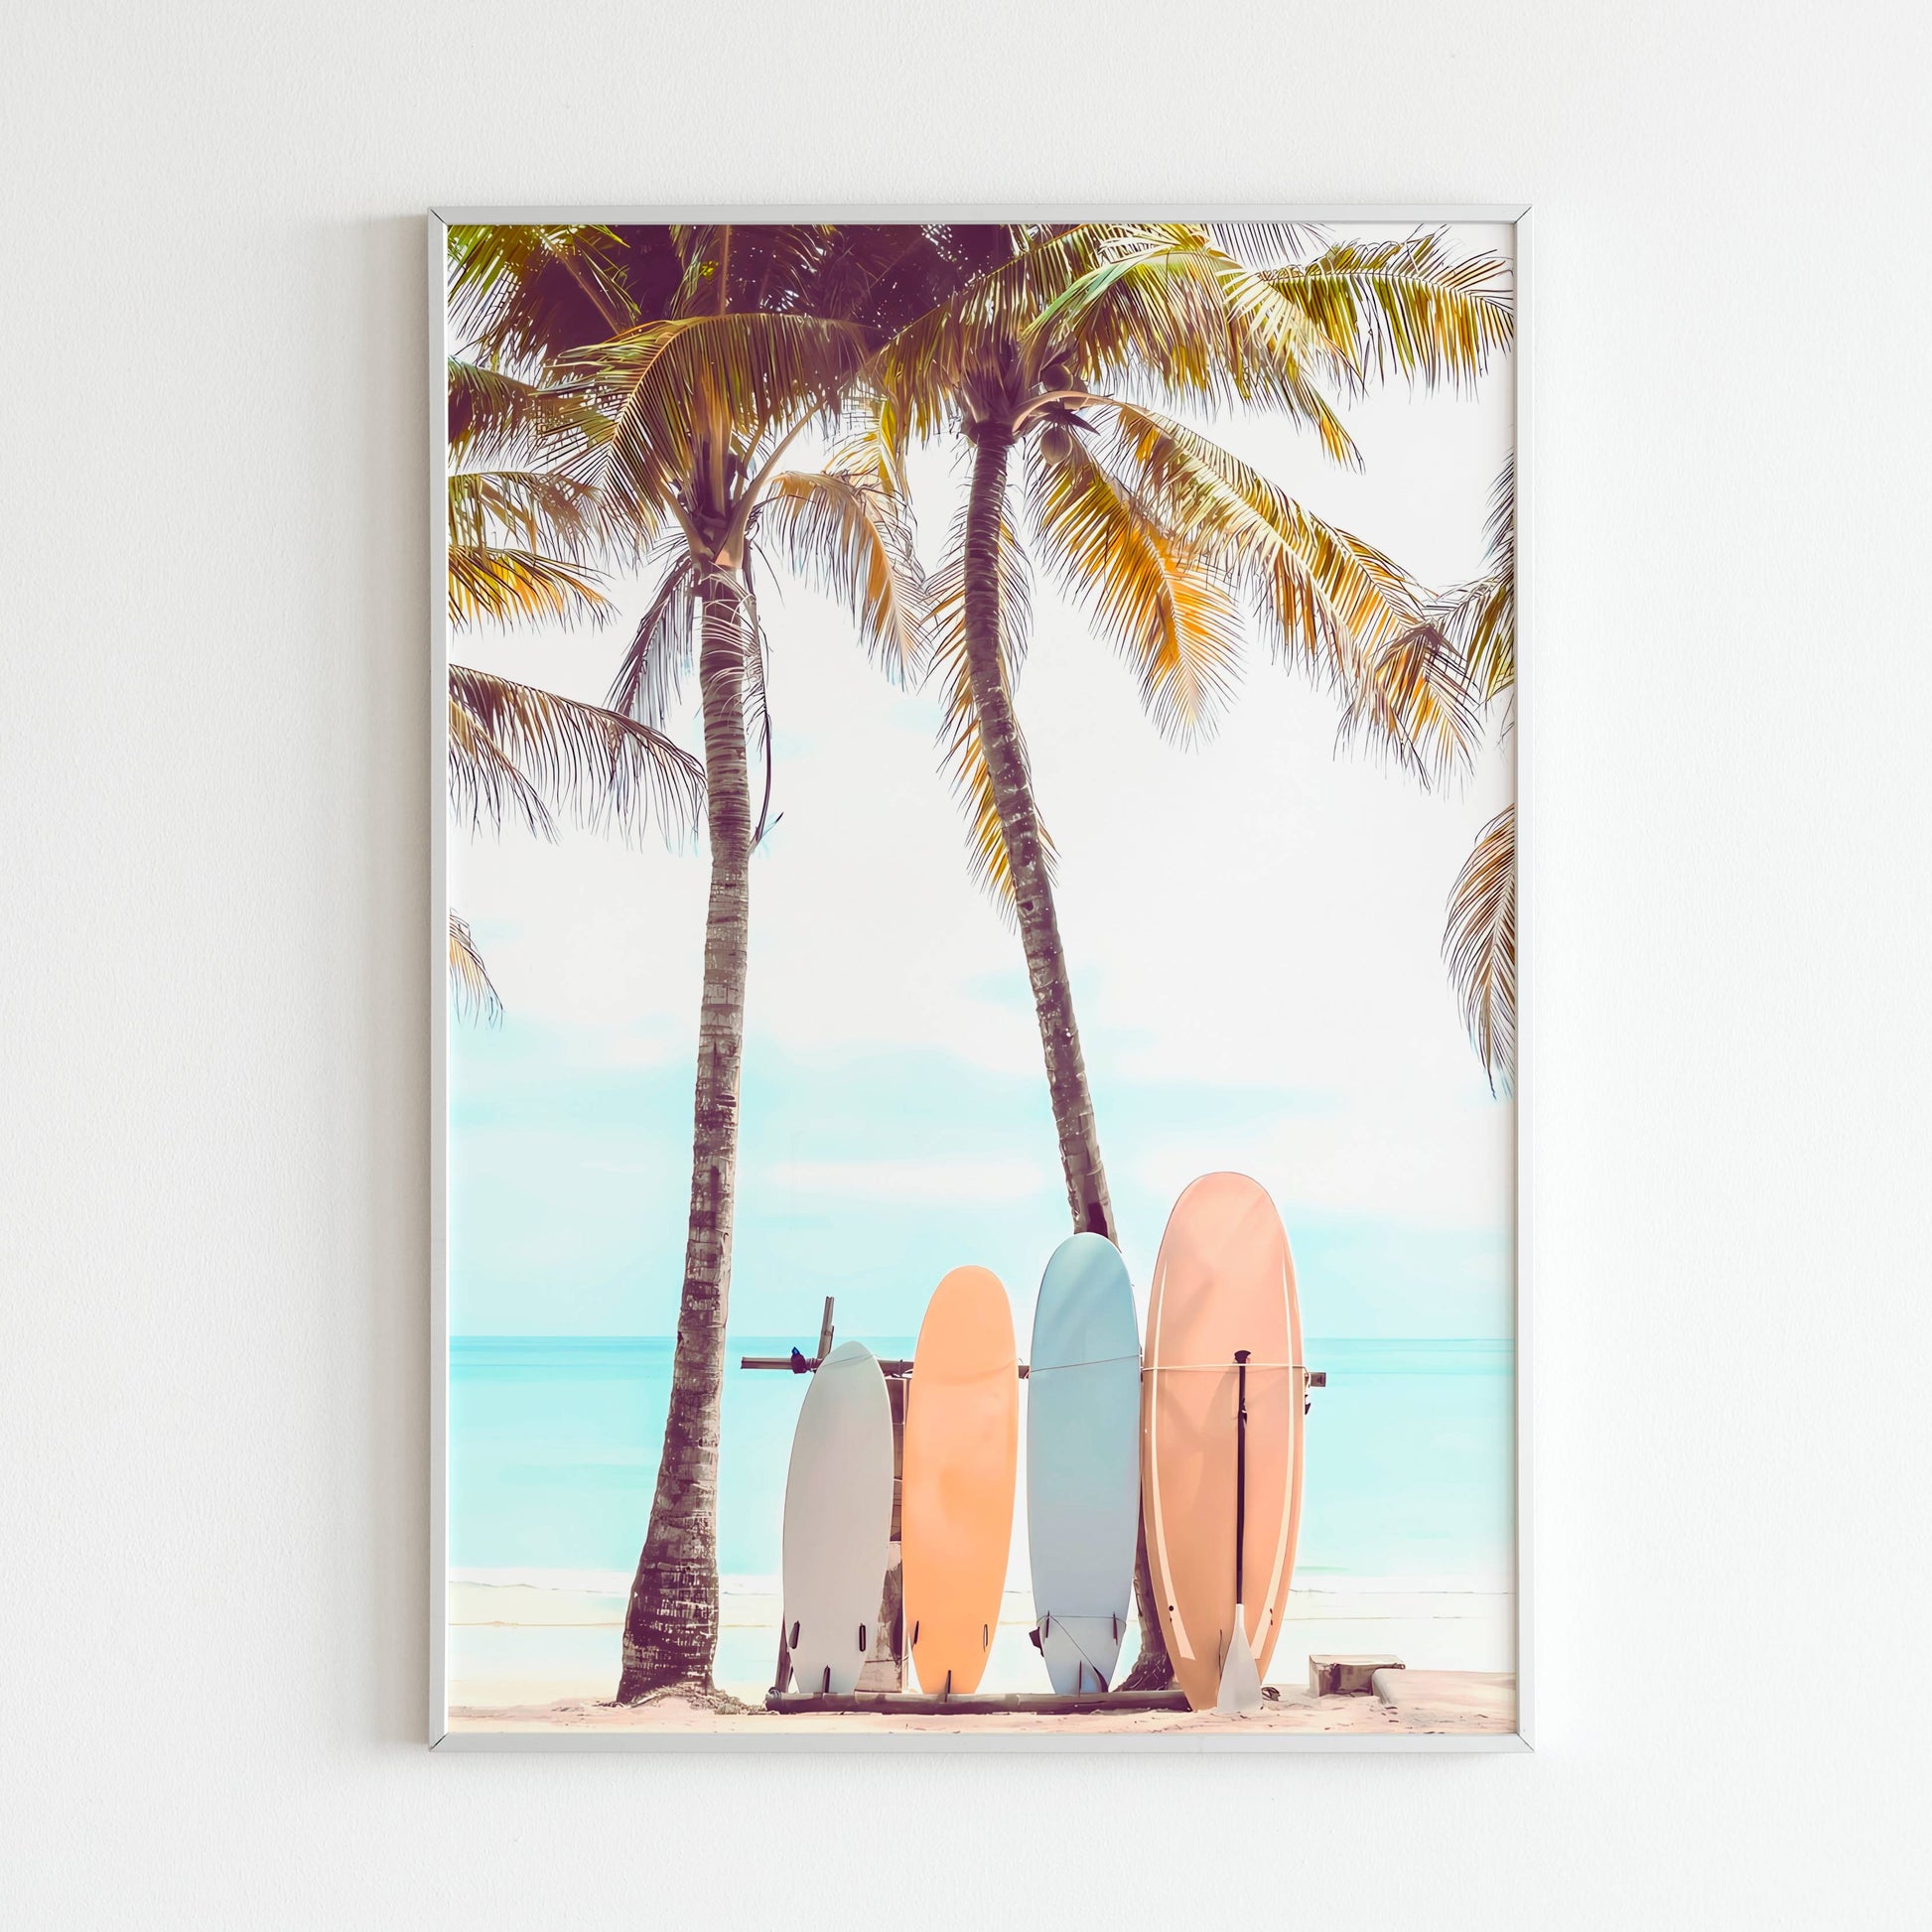 Capture the spirit of surfing with surfboards resting on a beach in this printable poster (physical or digital).